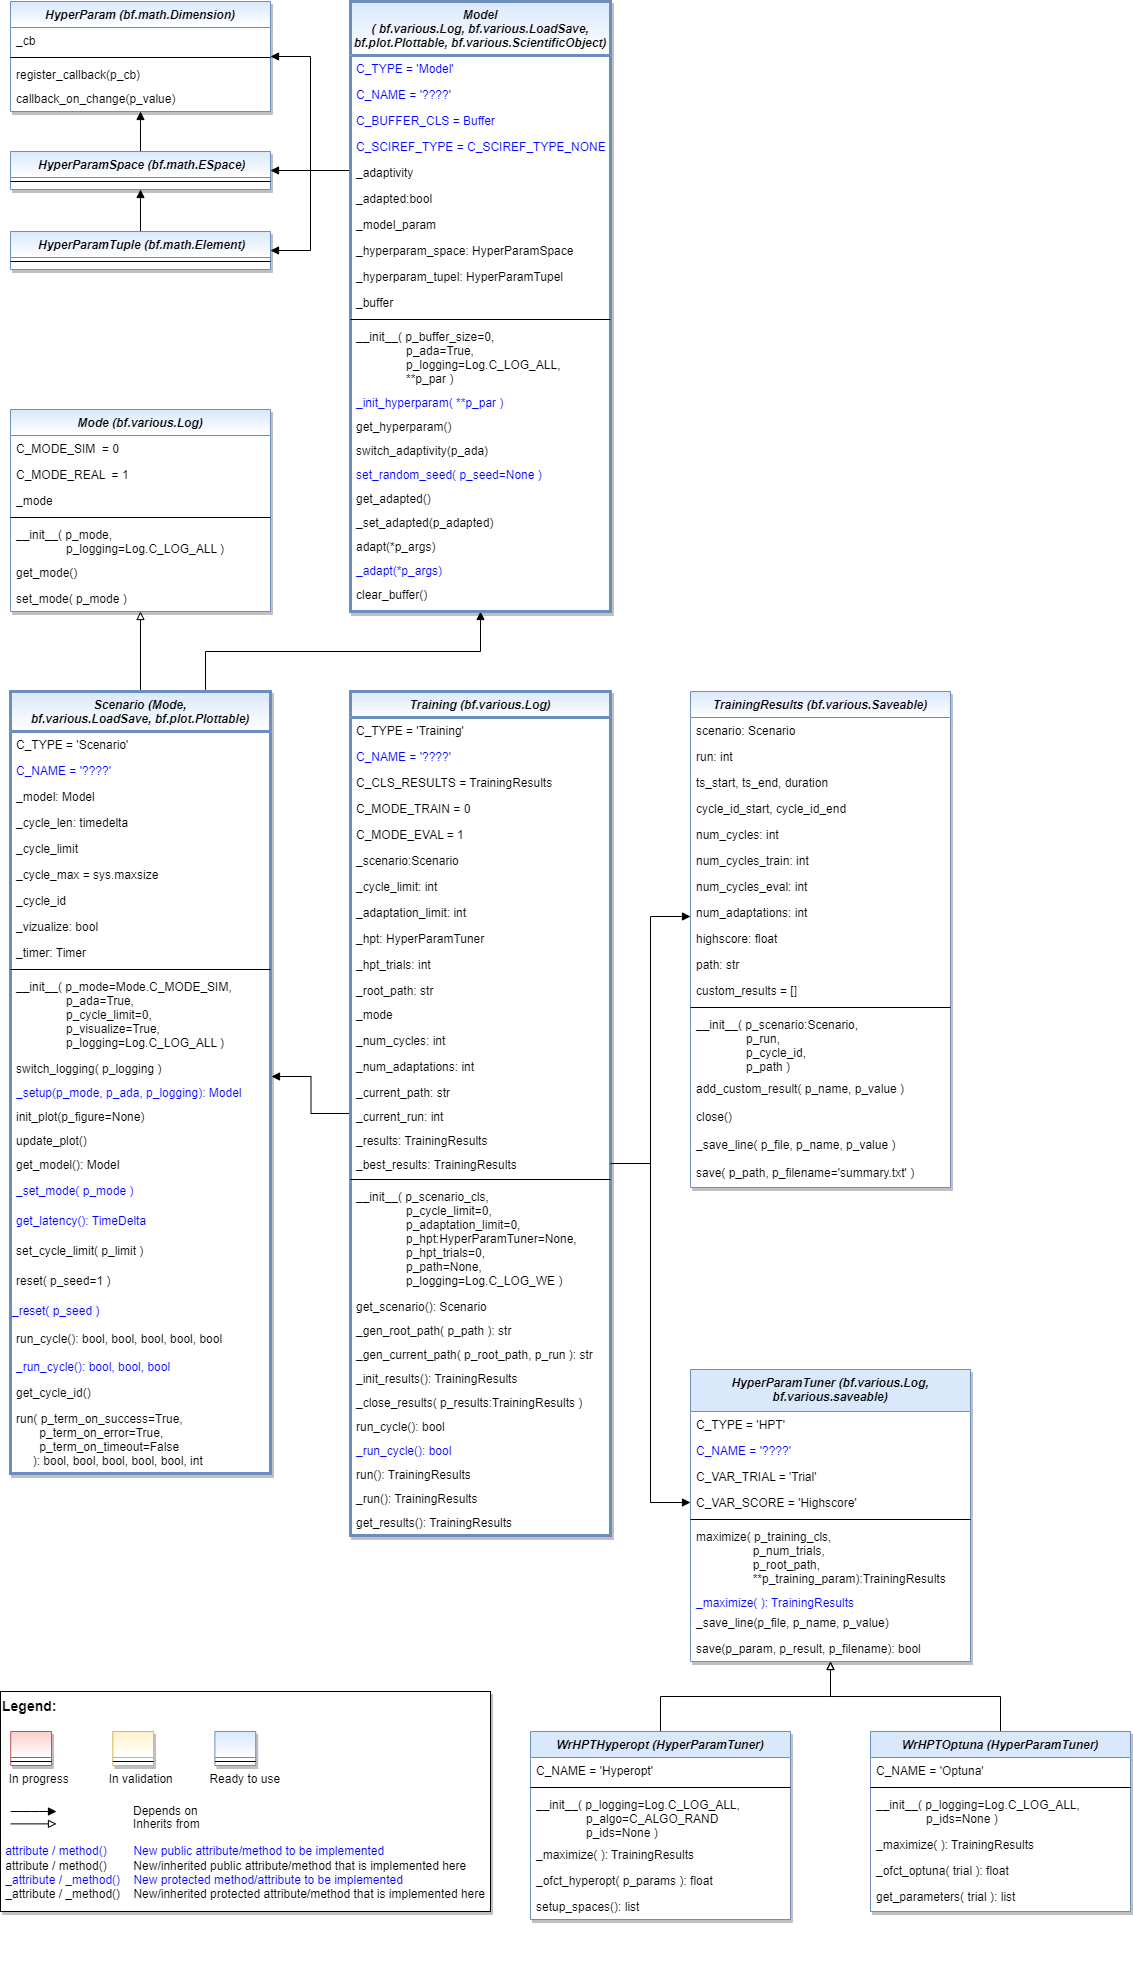 ../../../_images/MLPro-BF-ML_class_diagram.png